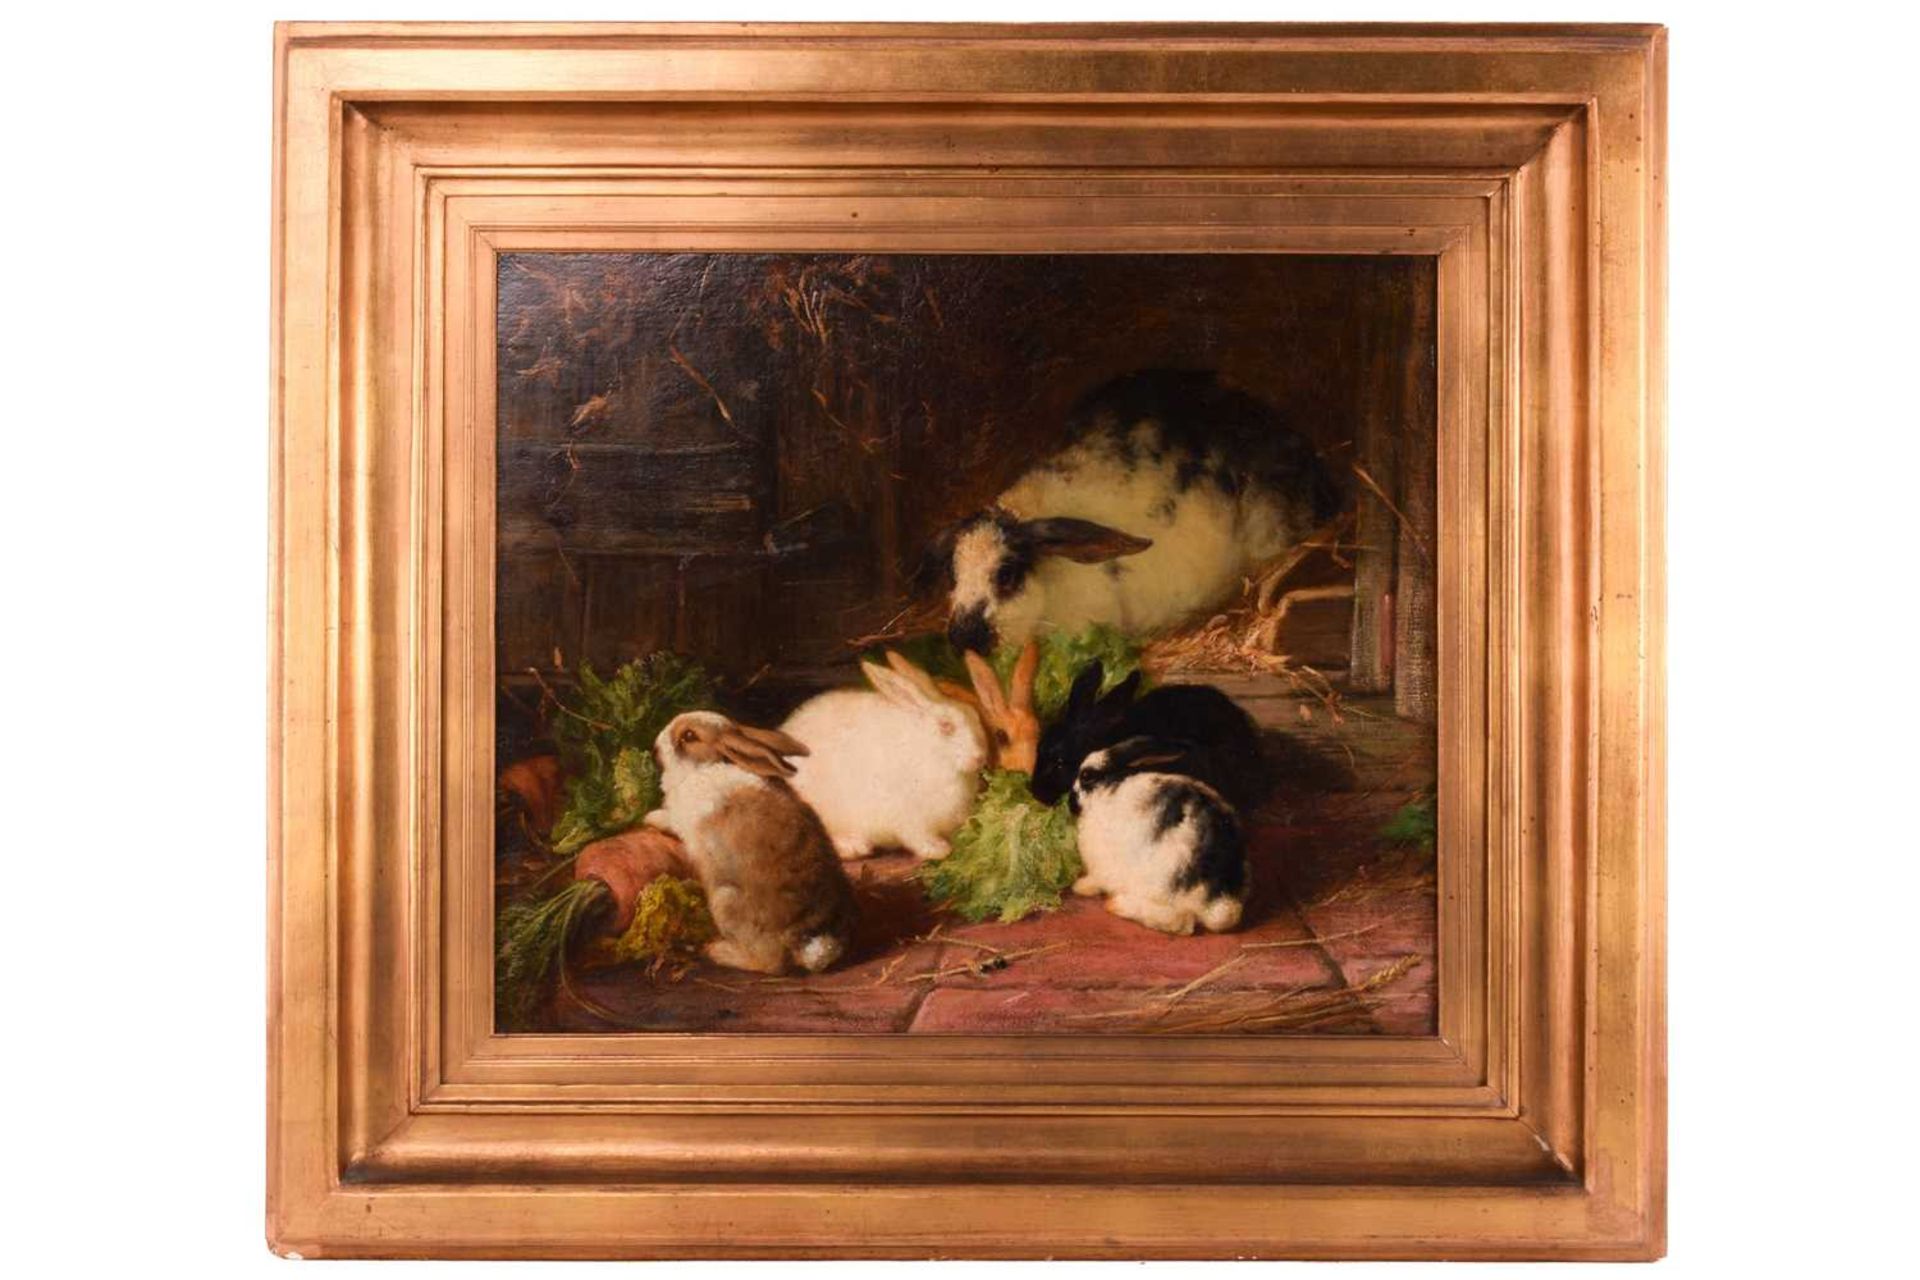 Thomas William Earl (fl.1836-1885), Family of Rabbits, signed, oil on canvas, 49 x 50.5 cm,